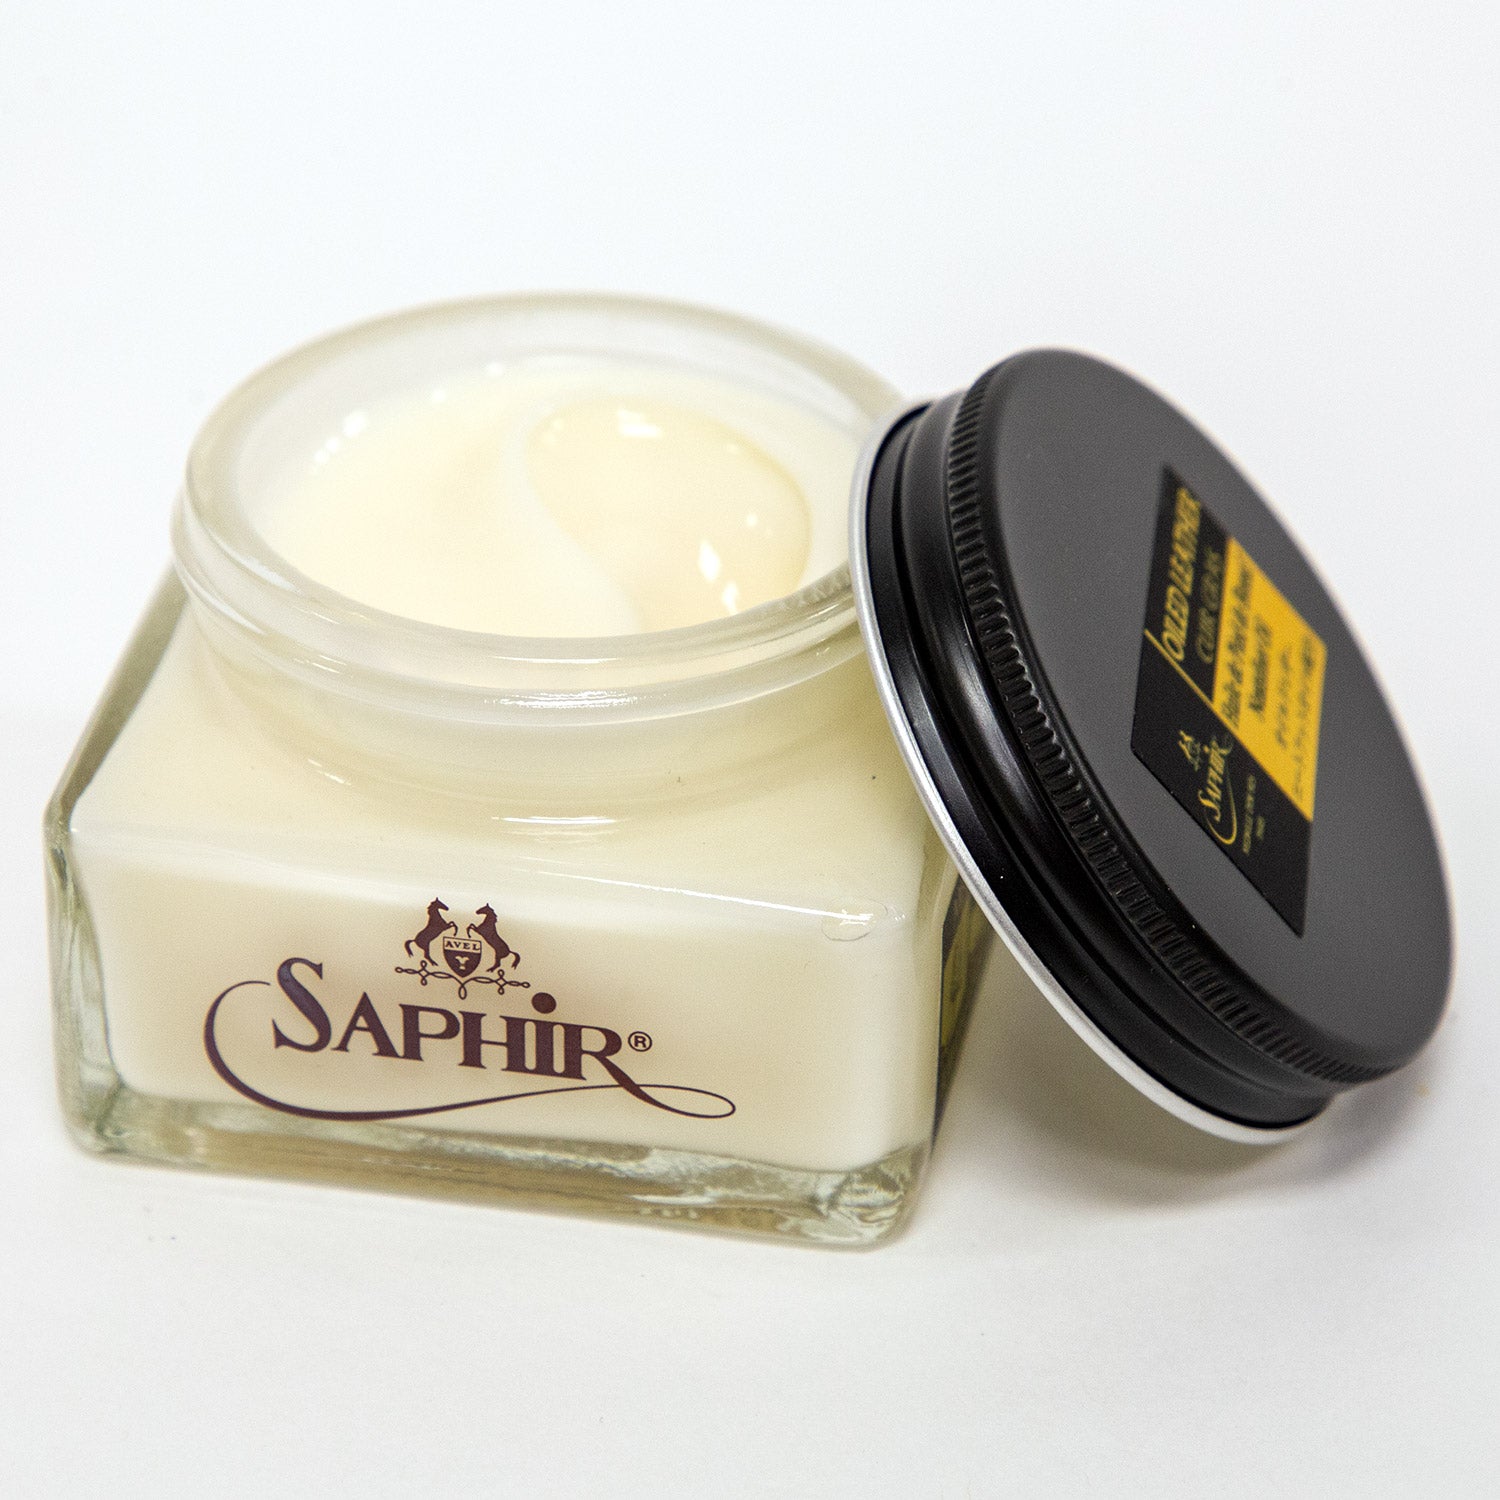 Saphir Medaille D’or Oiled Leather Cream with Neatsfoot Oil for Nourishing and Water Repellence - Neutral